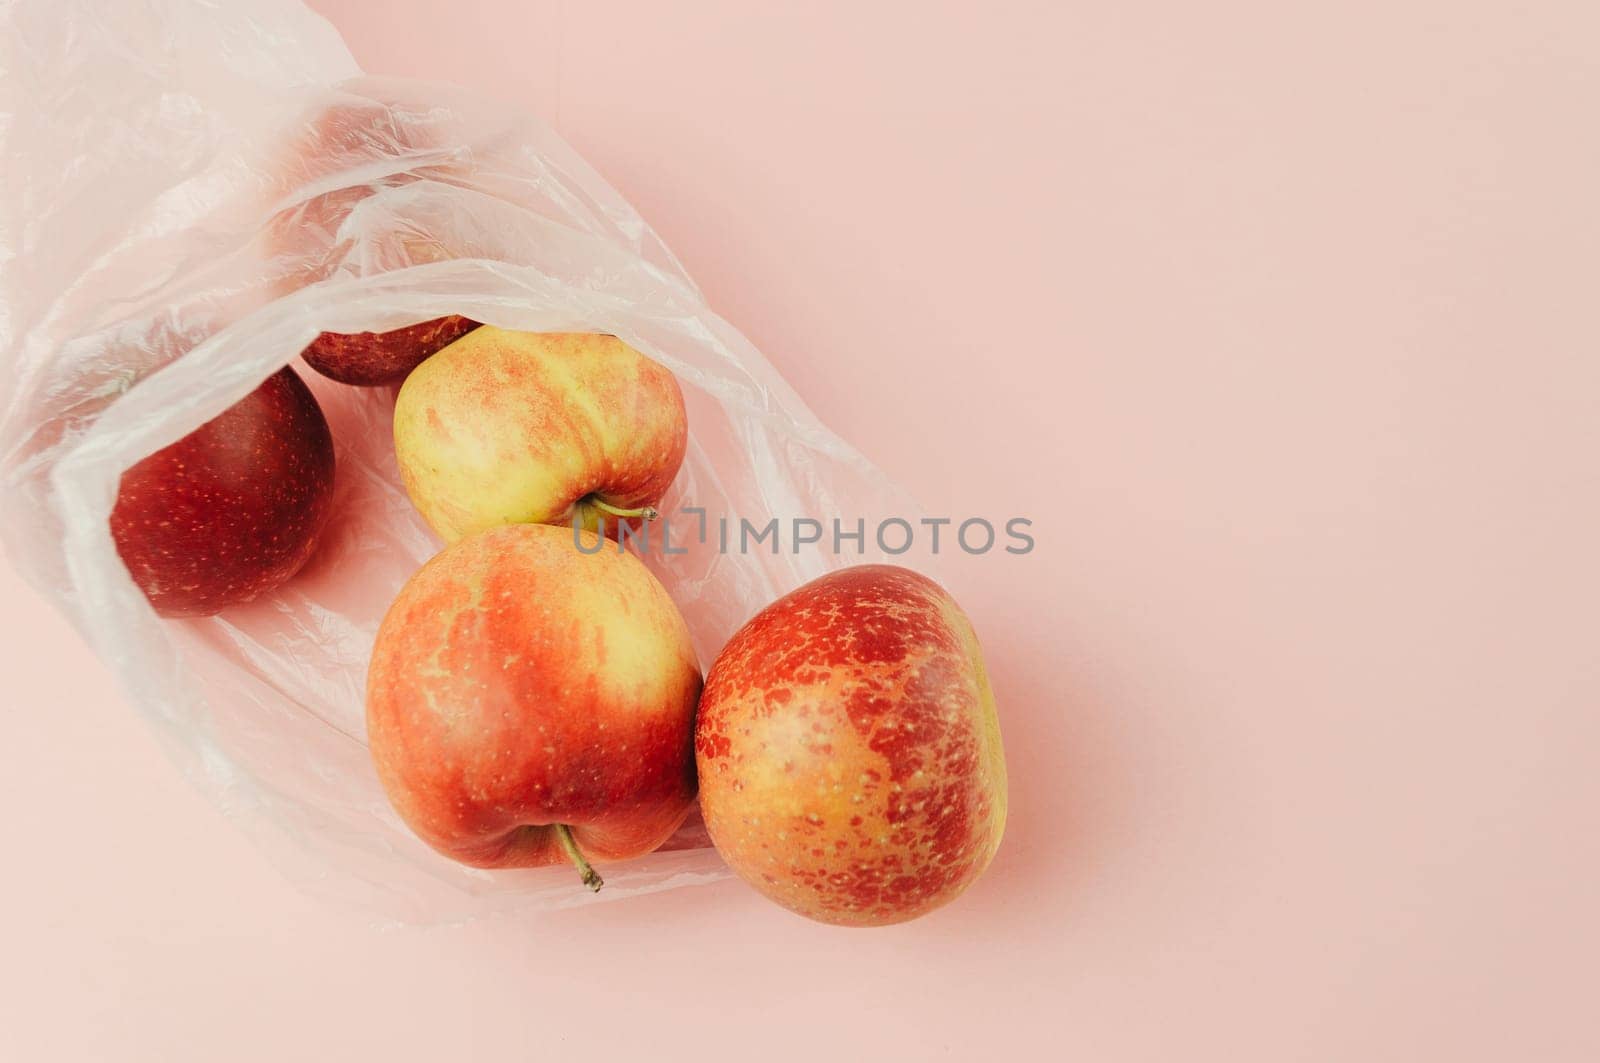 A bag of apples is on a pink background. The apples are red and green